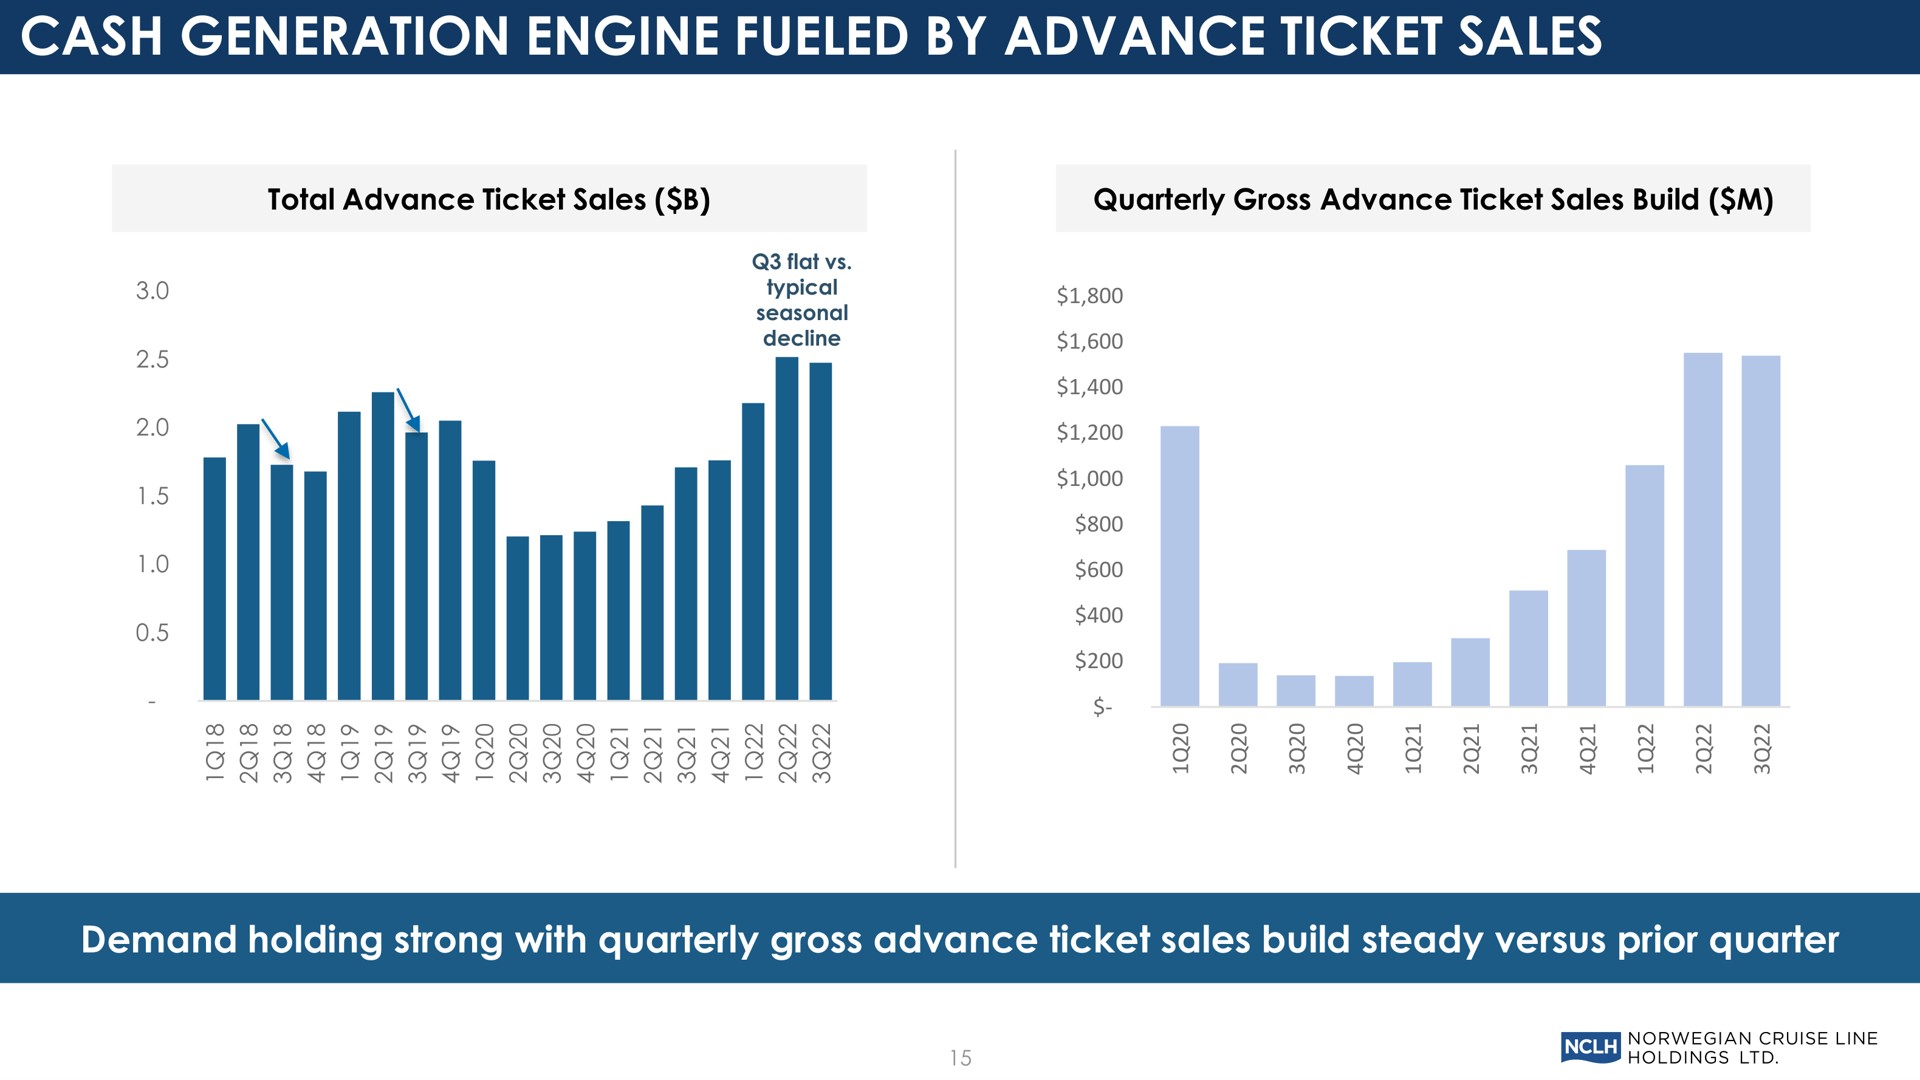 cash generation engine fueled by advance ticket sales demand holding strong with quarterly gross advance ticket sales build steady versus prior quarter | Norwegian Cruise Line